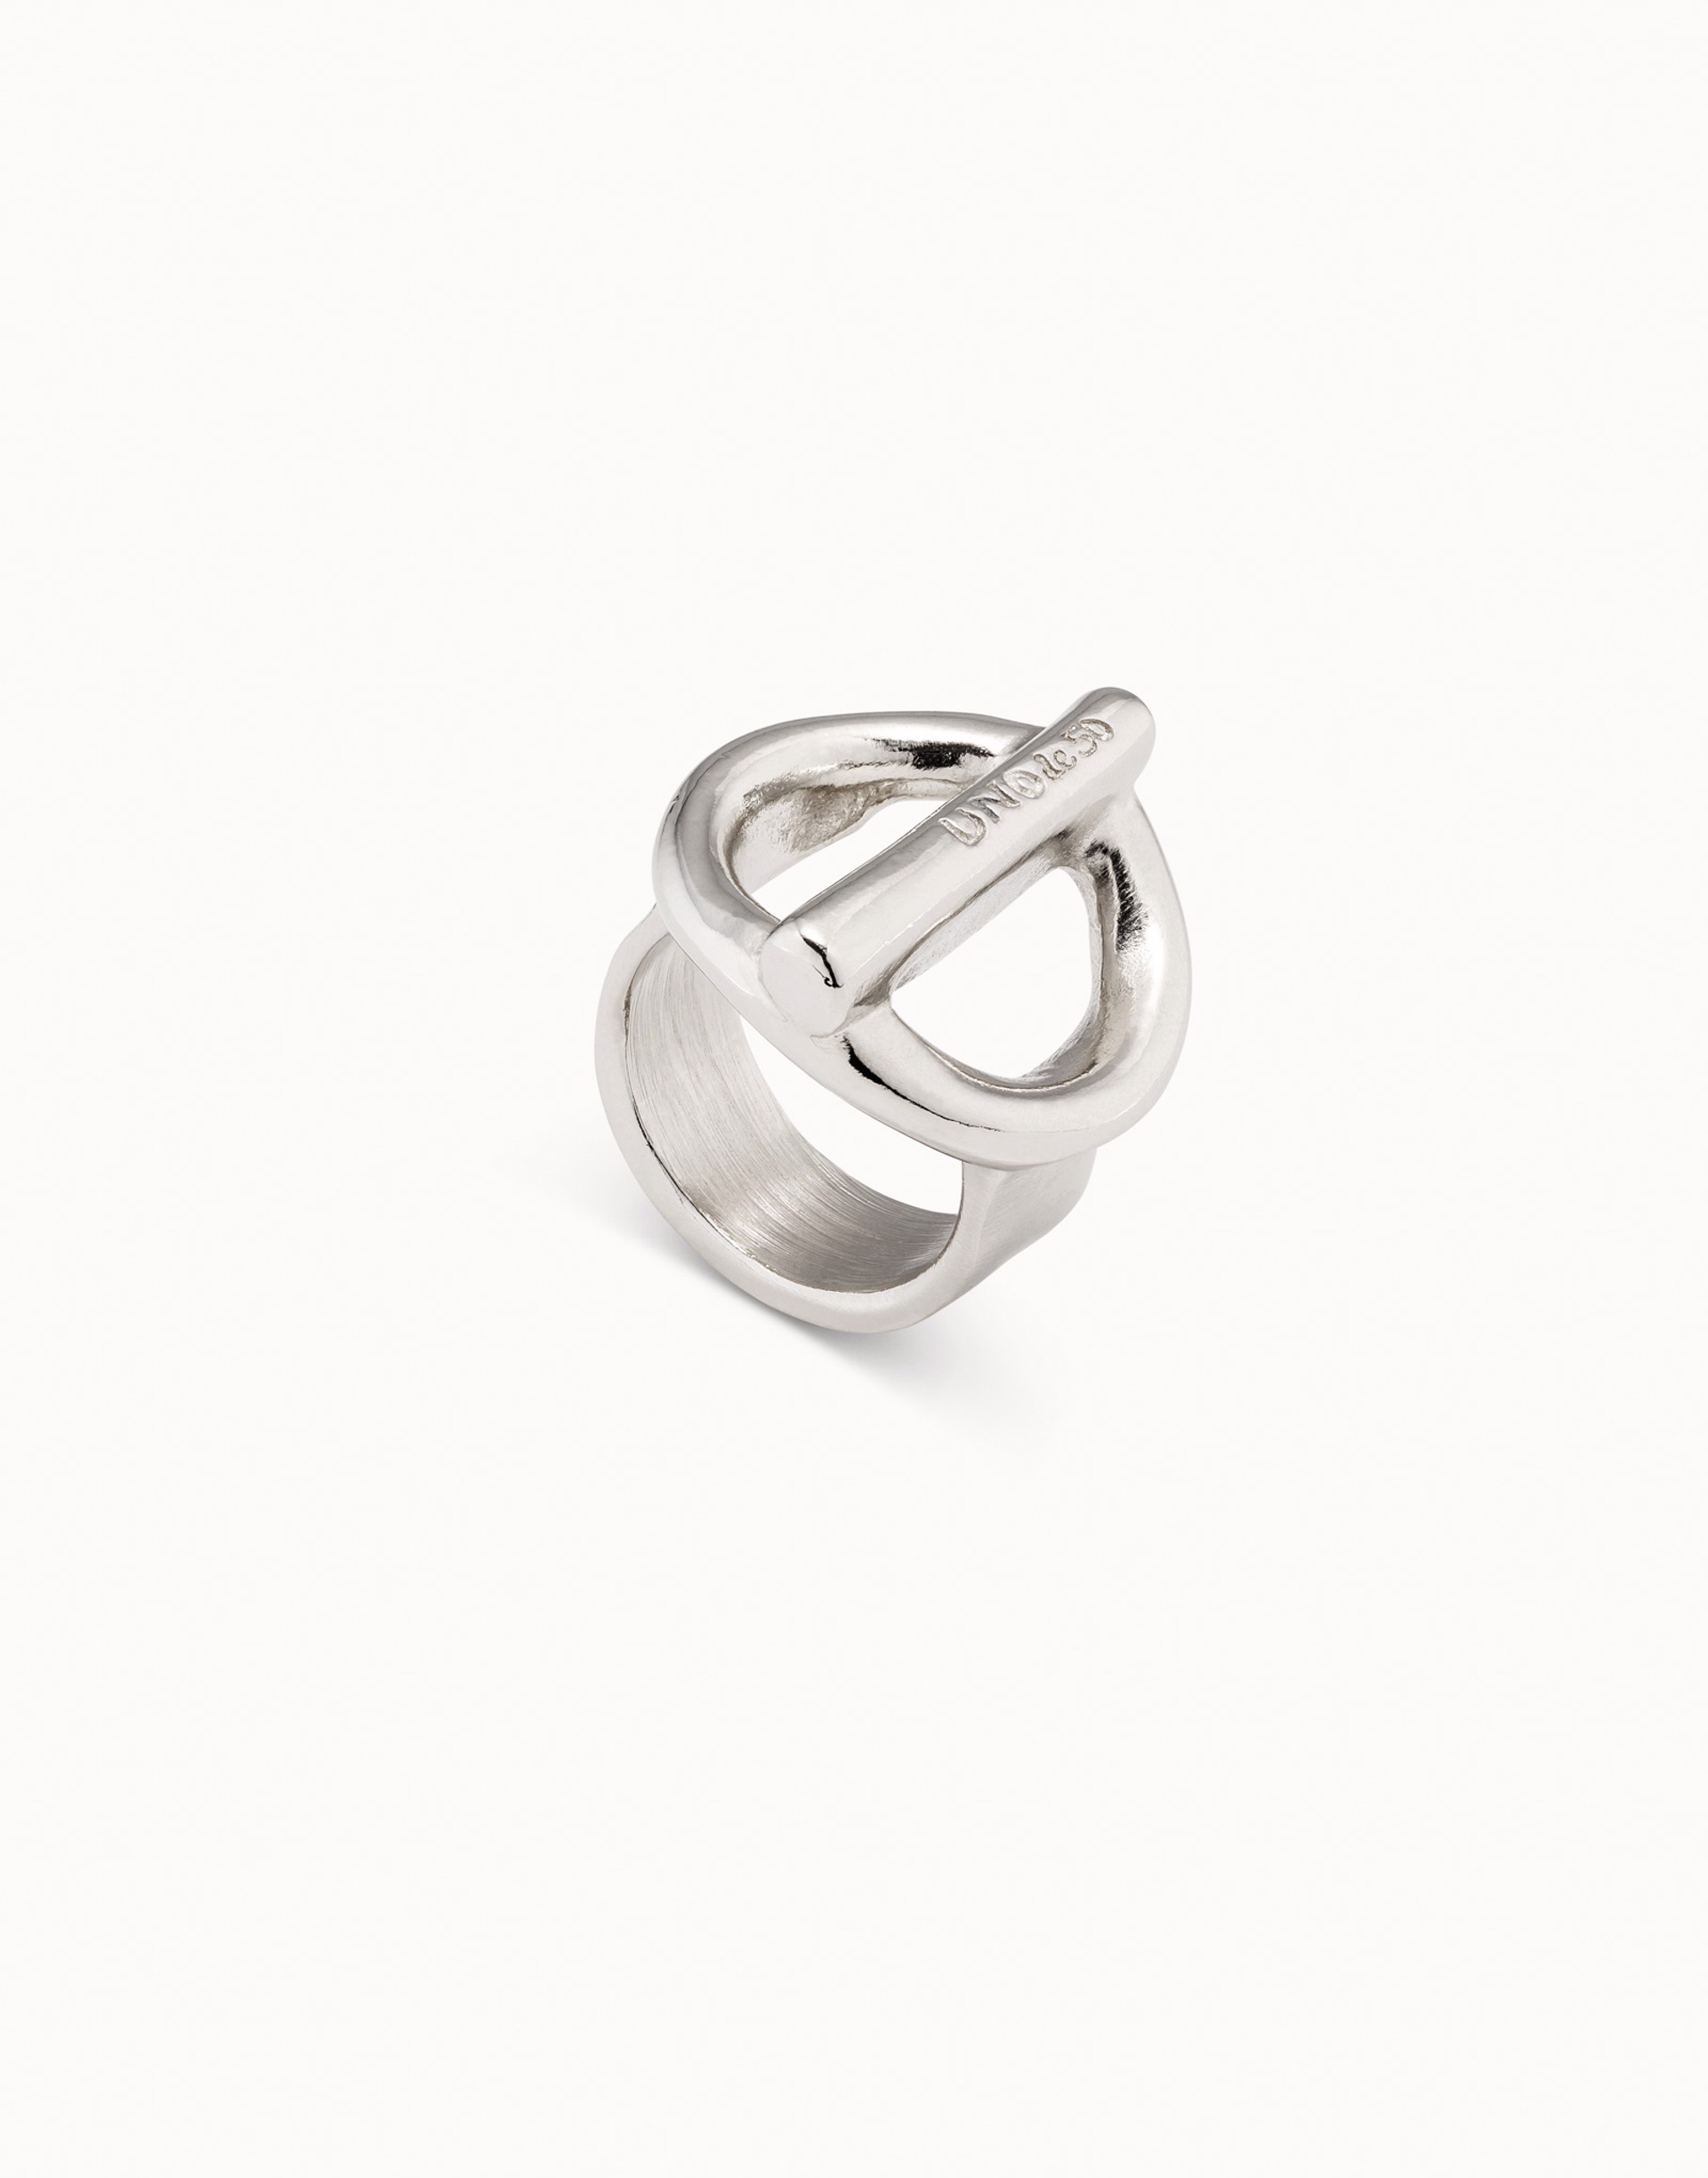 9321 On/Off Ring Silver by UNO DE 50